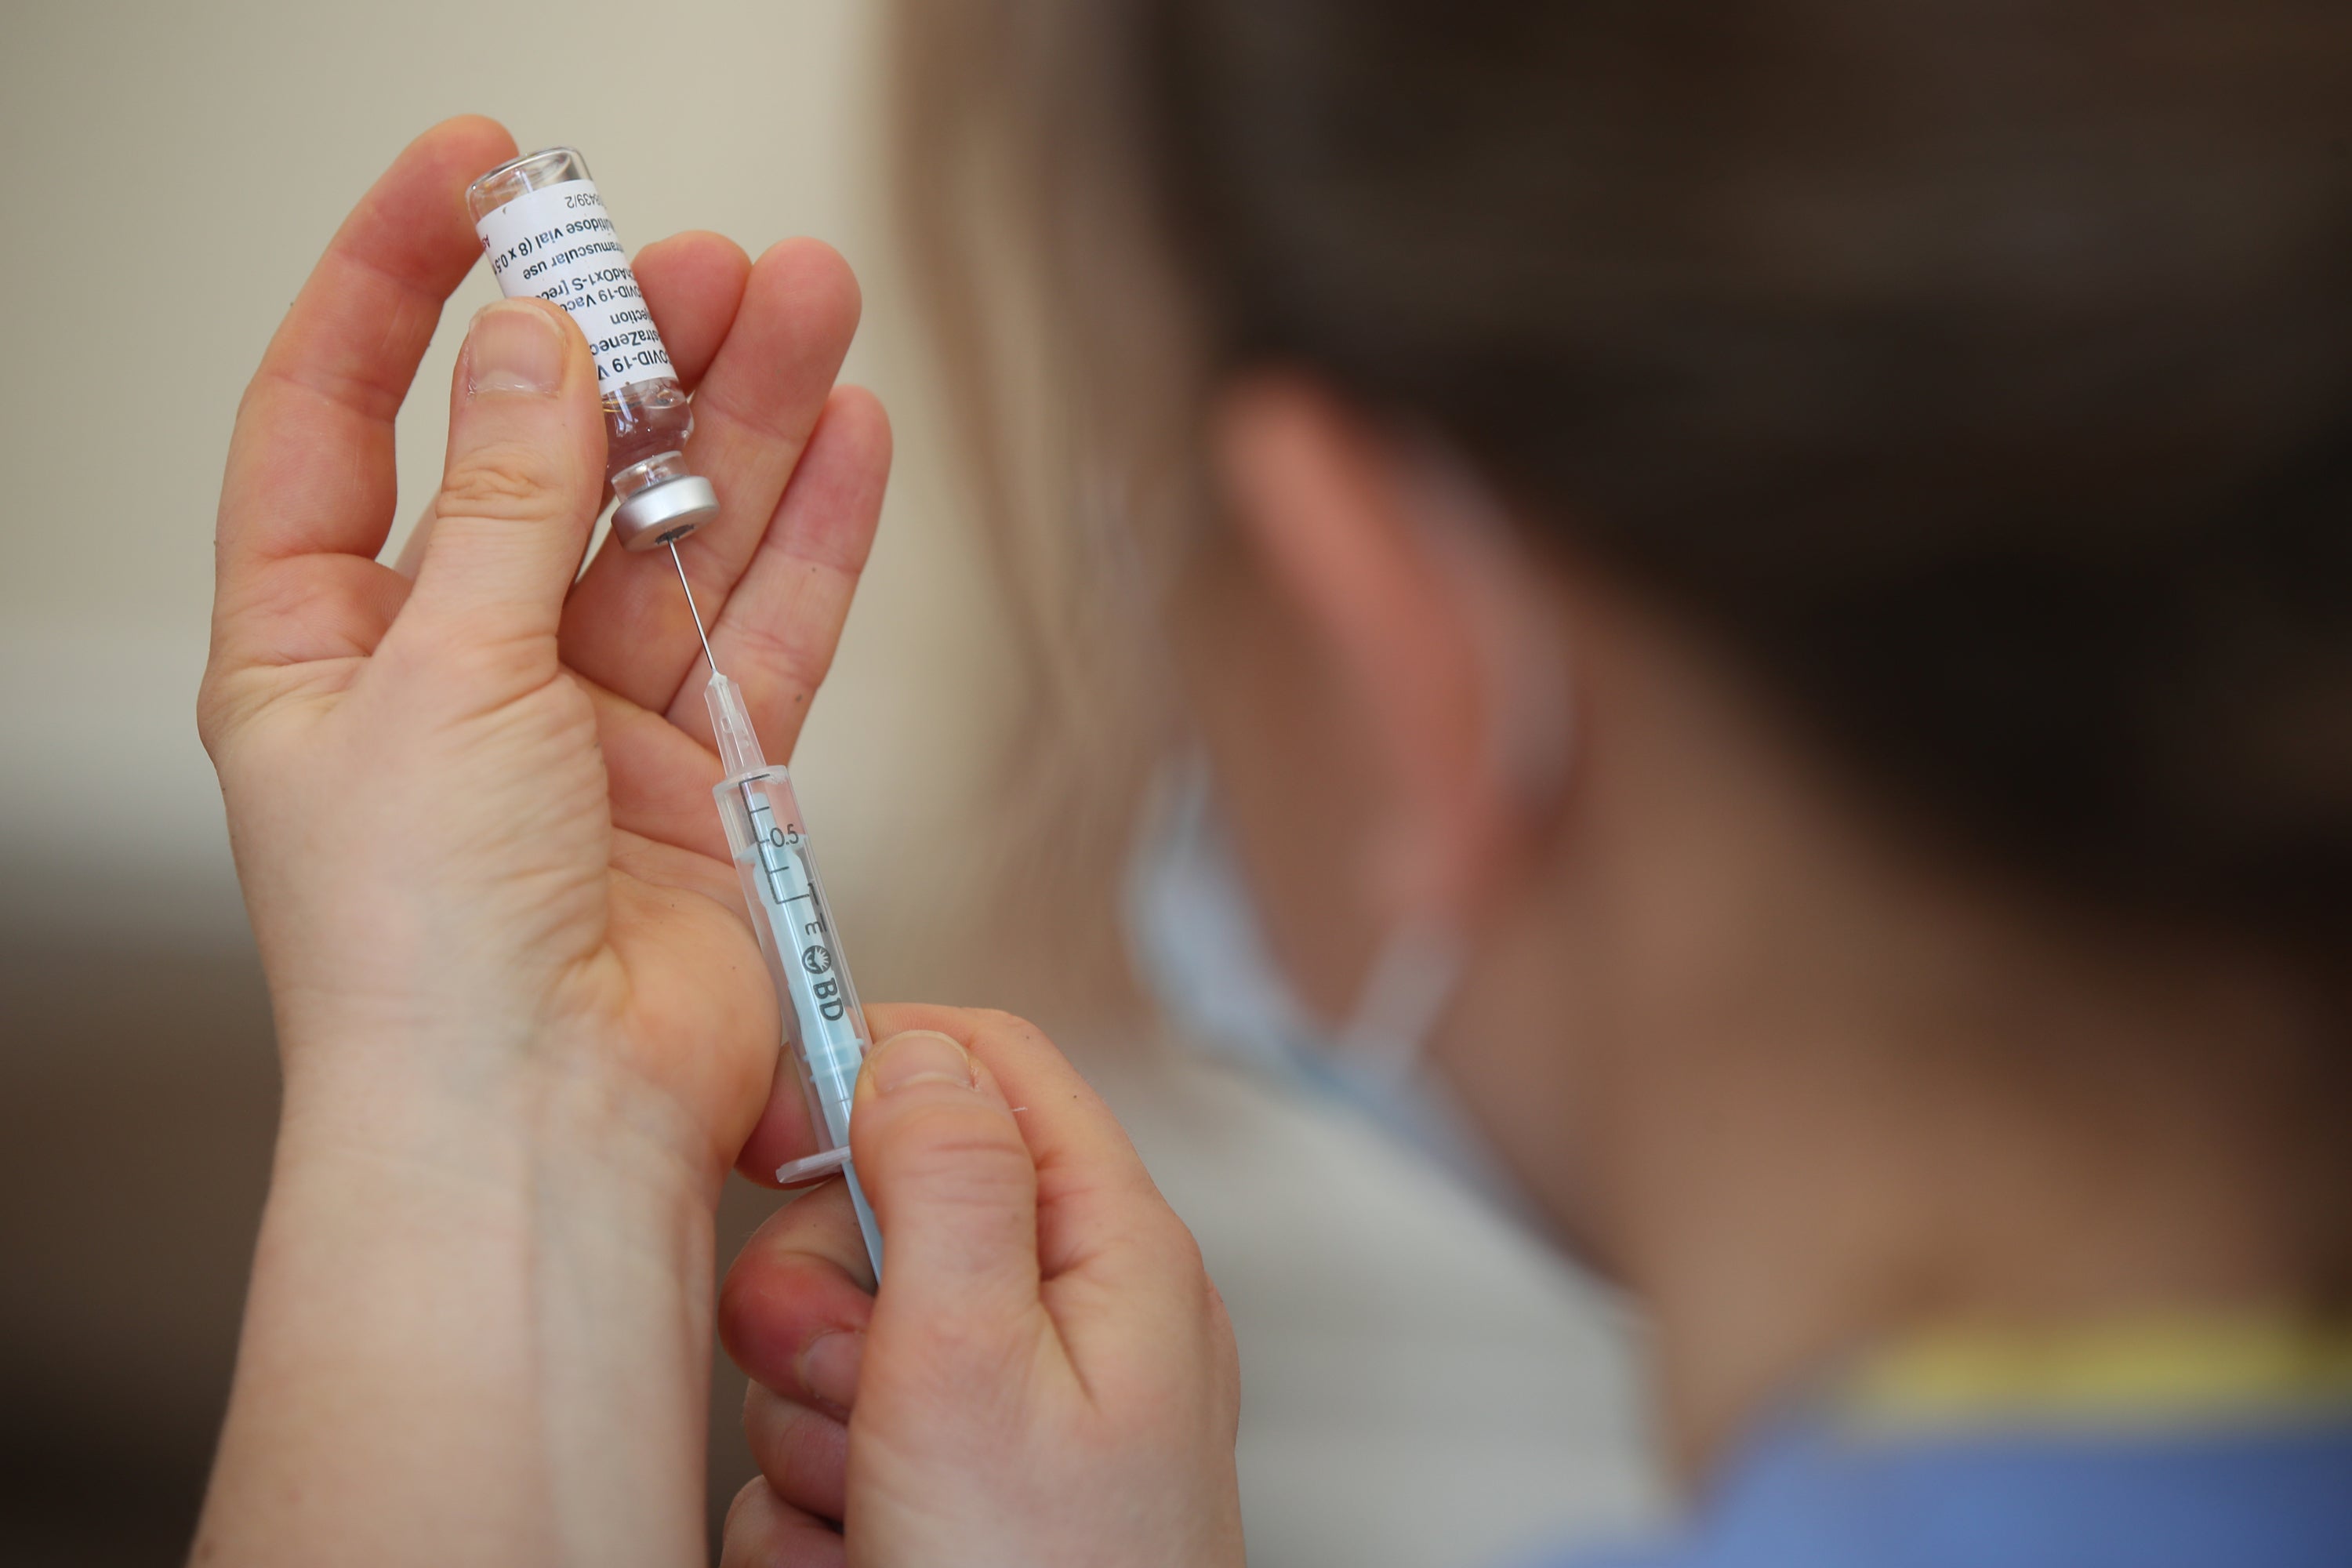 Ministers said everyone should have access to the vaccine